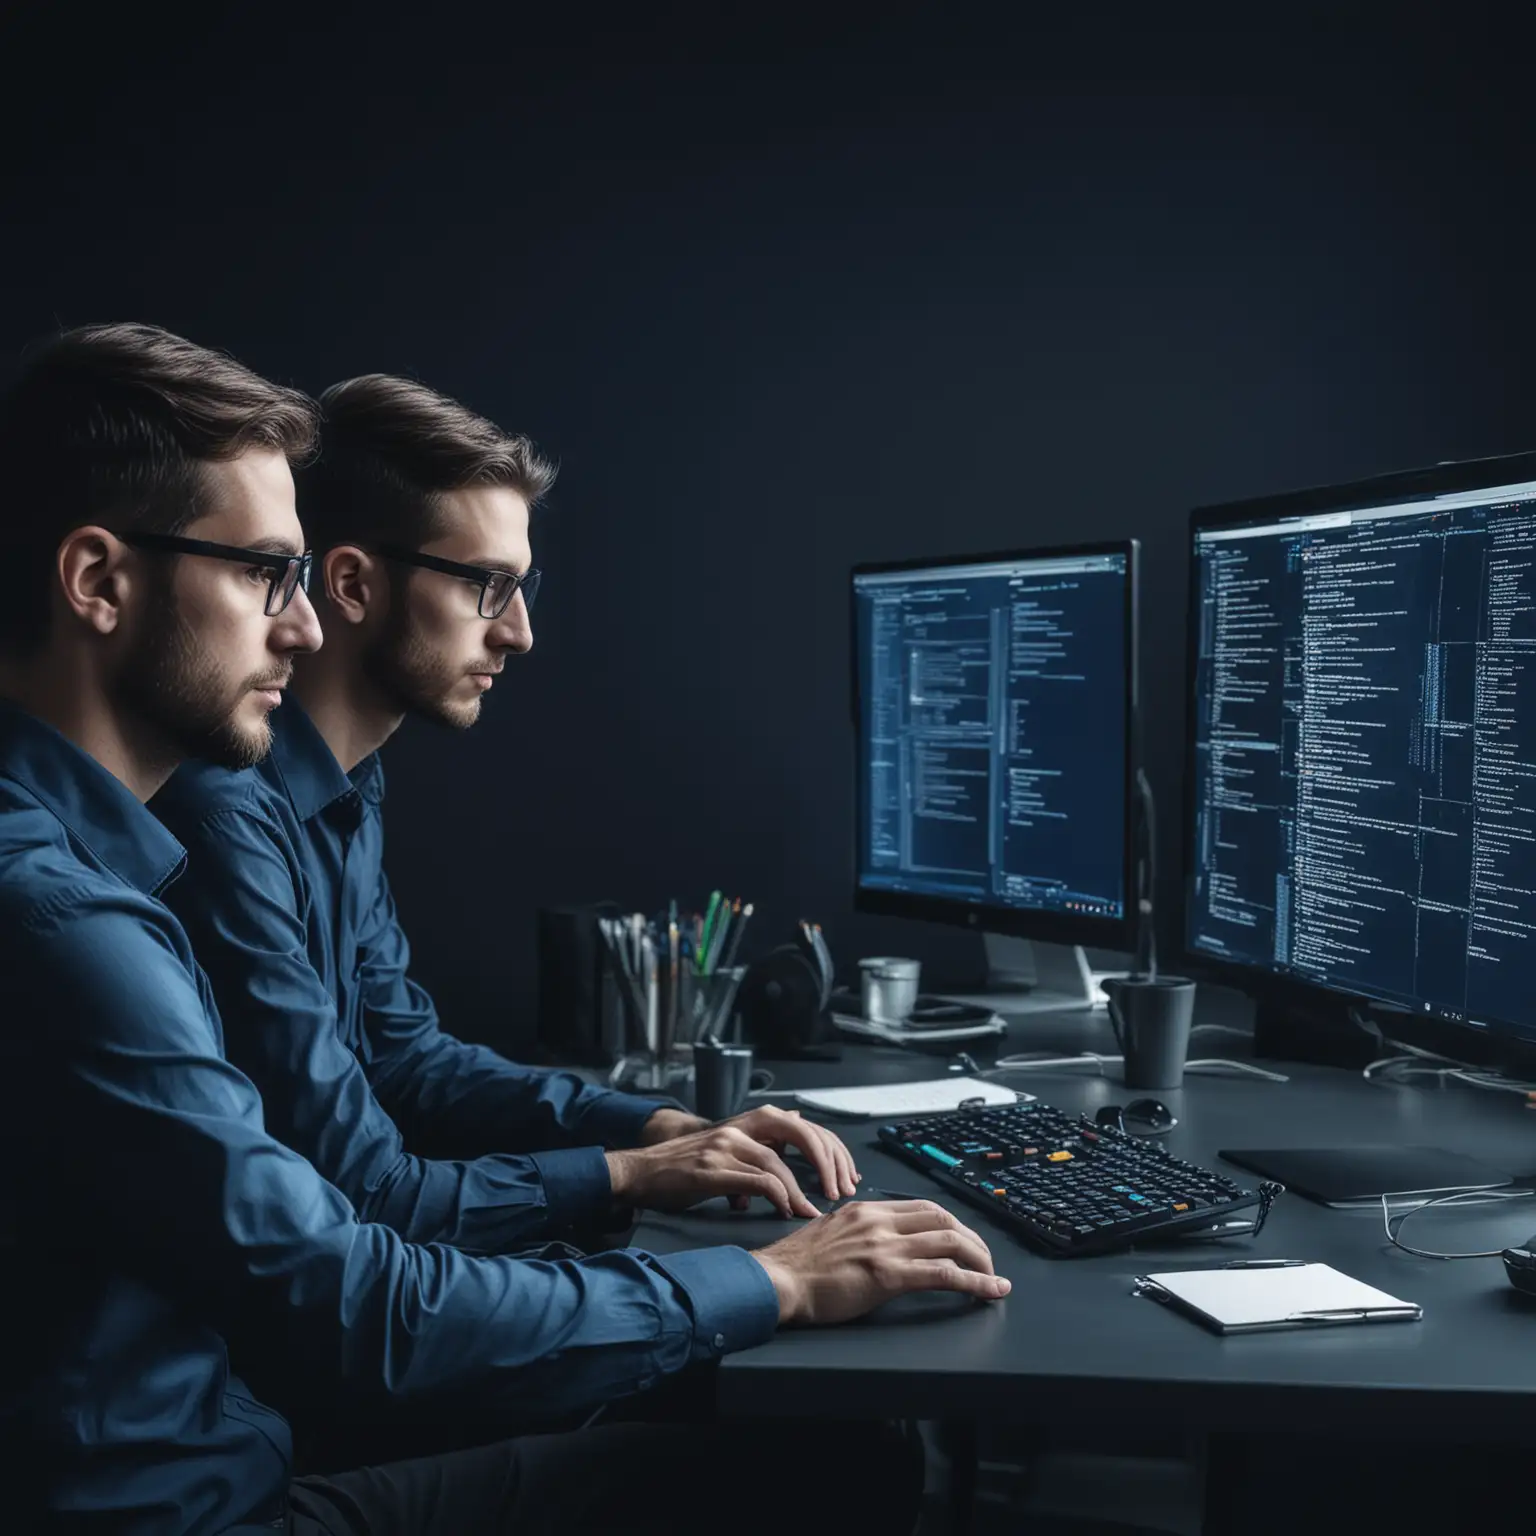 dark blue theme. Professional photo with 2 it developers coding